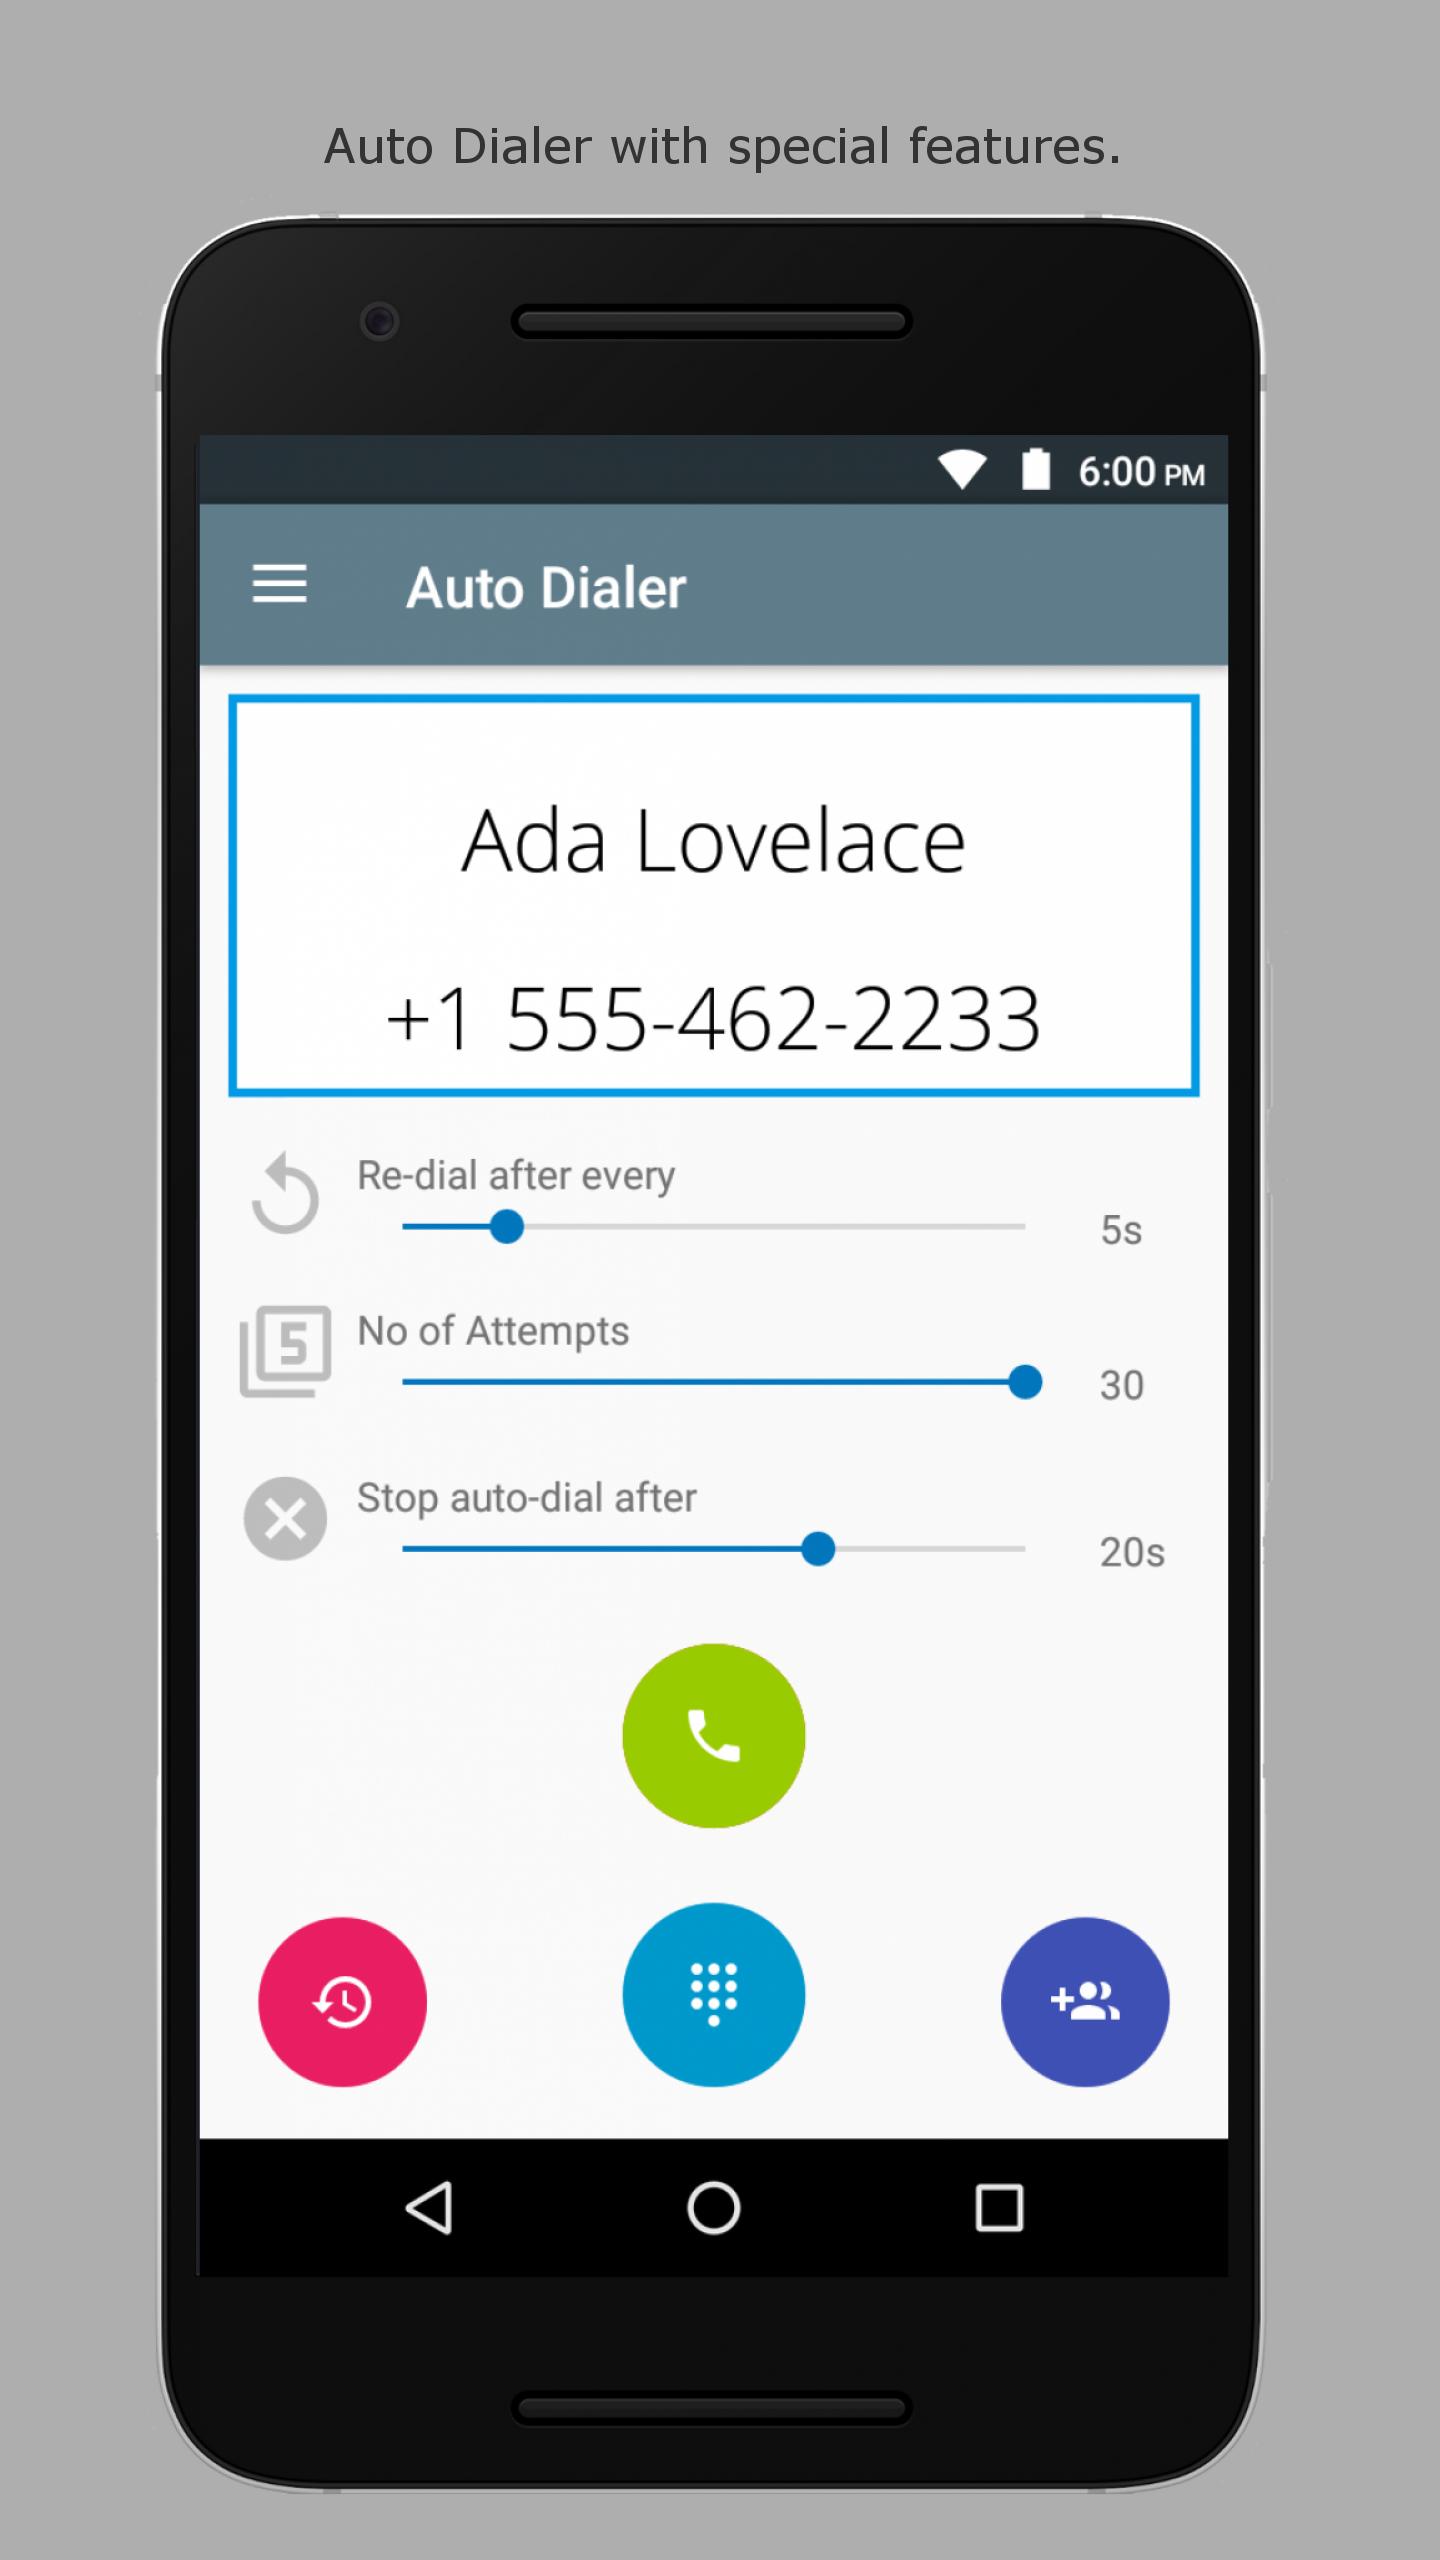 Auto Dialer for Android - APK Download